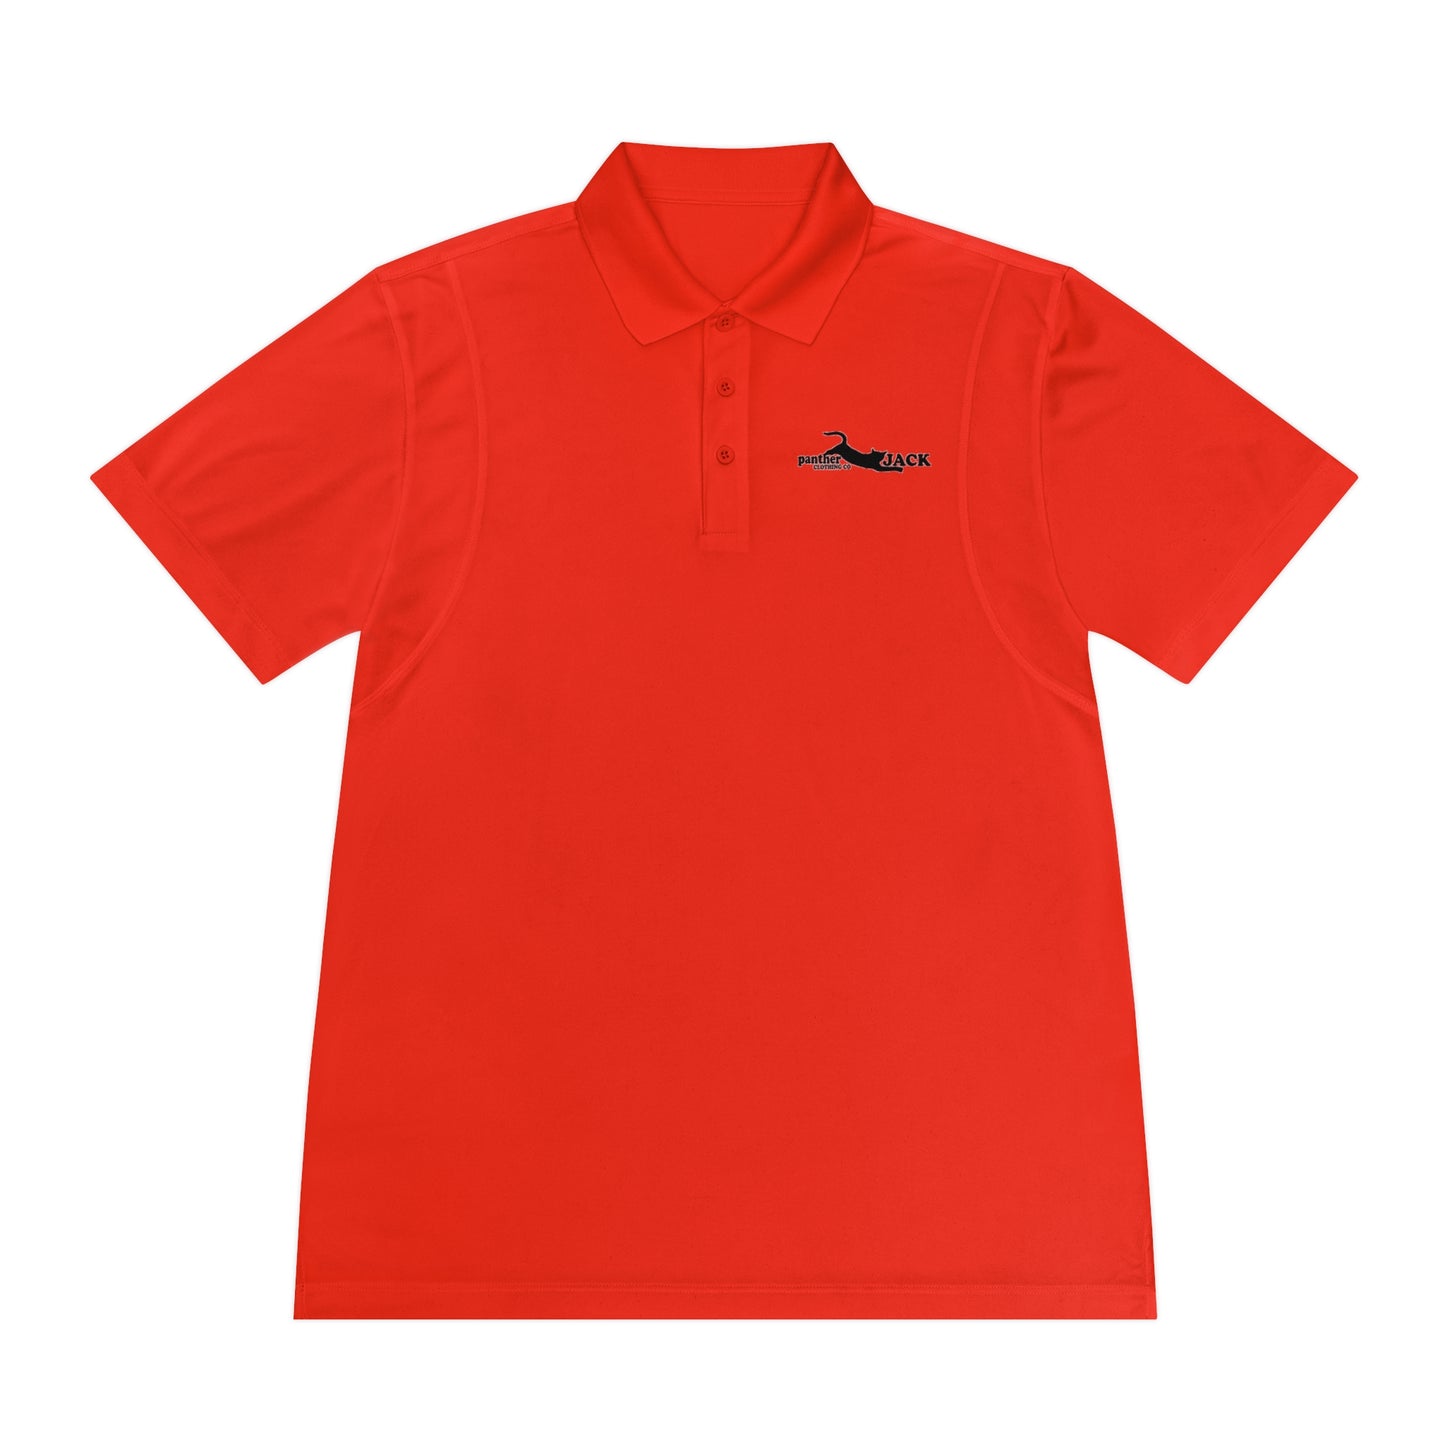 The Panther JACK Golf Polo